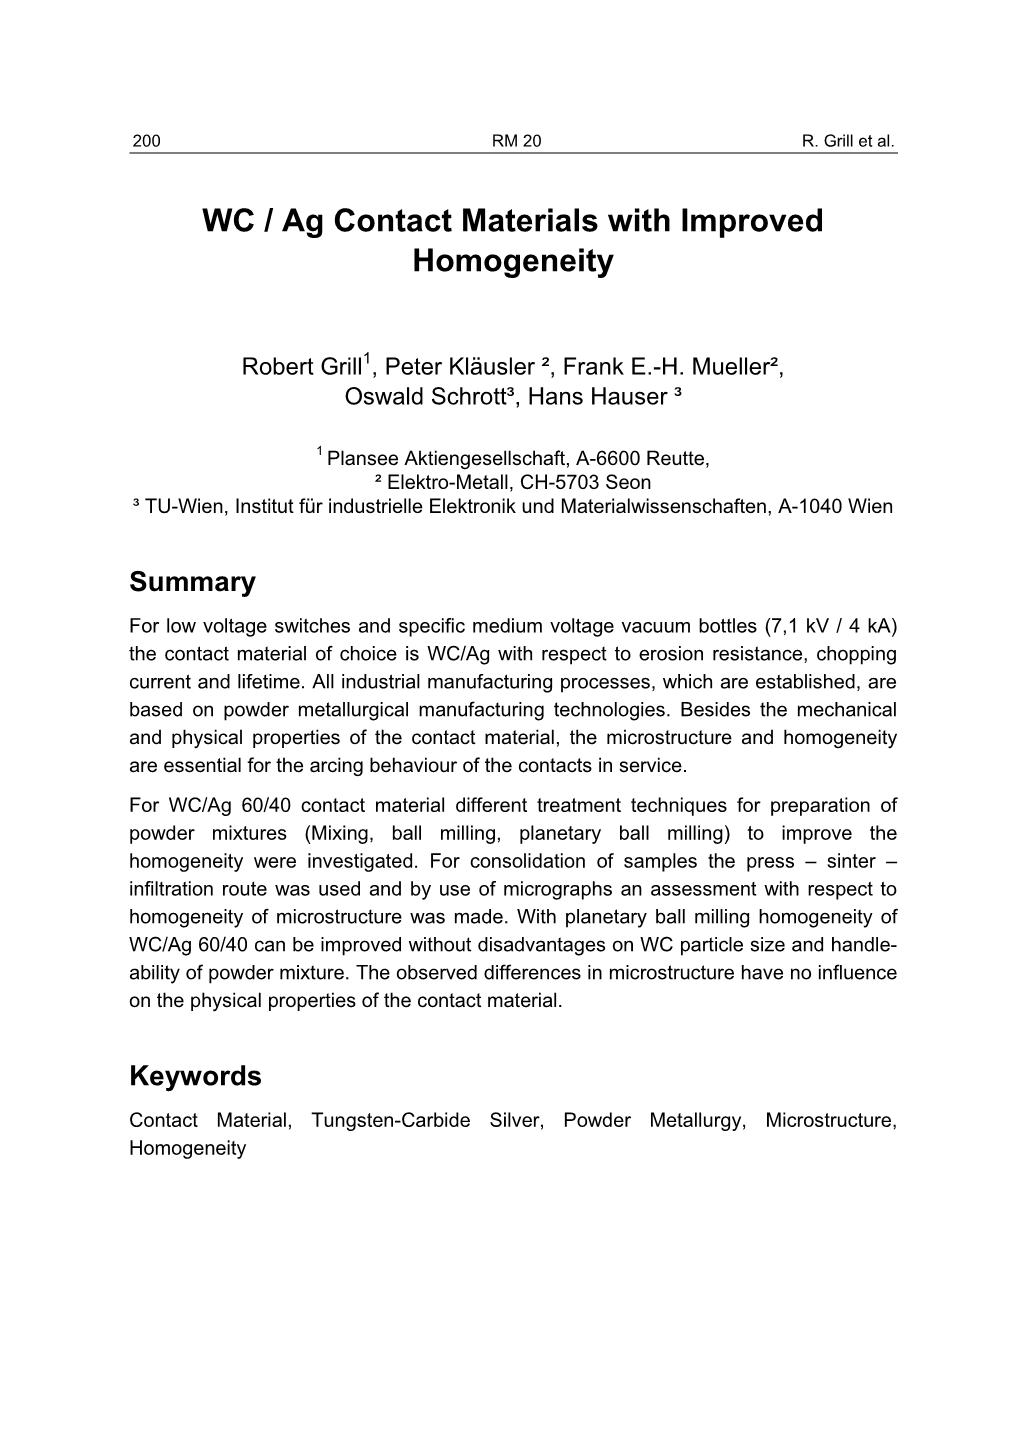 WC / Ag Contact Materials with Improved Homogeneity